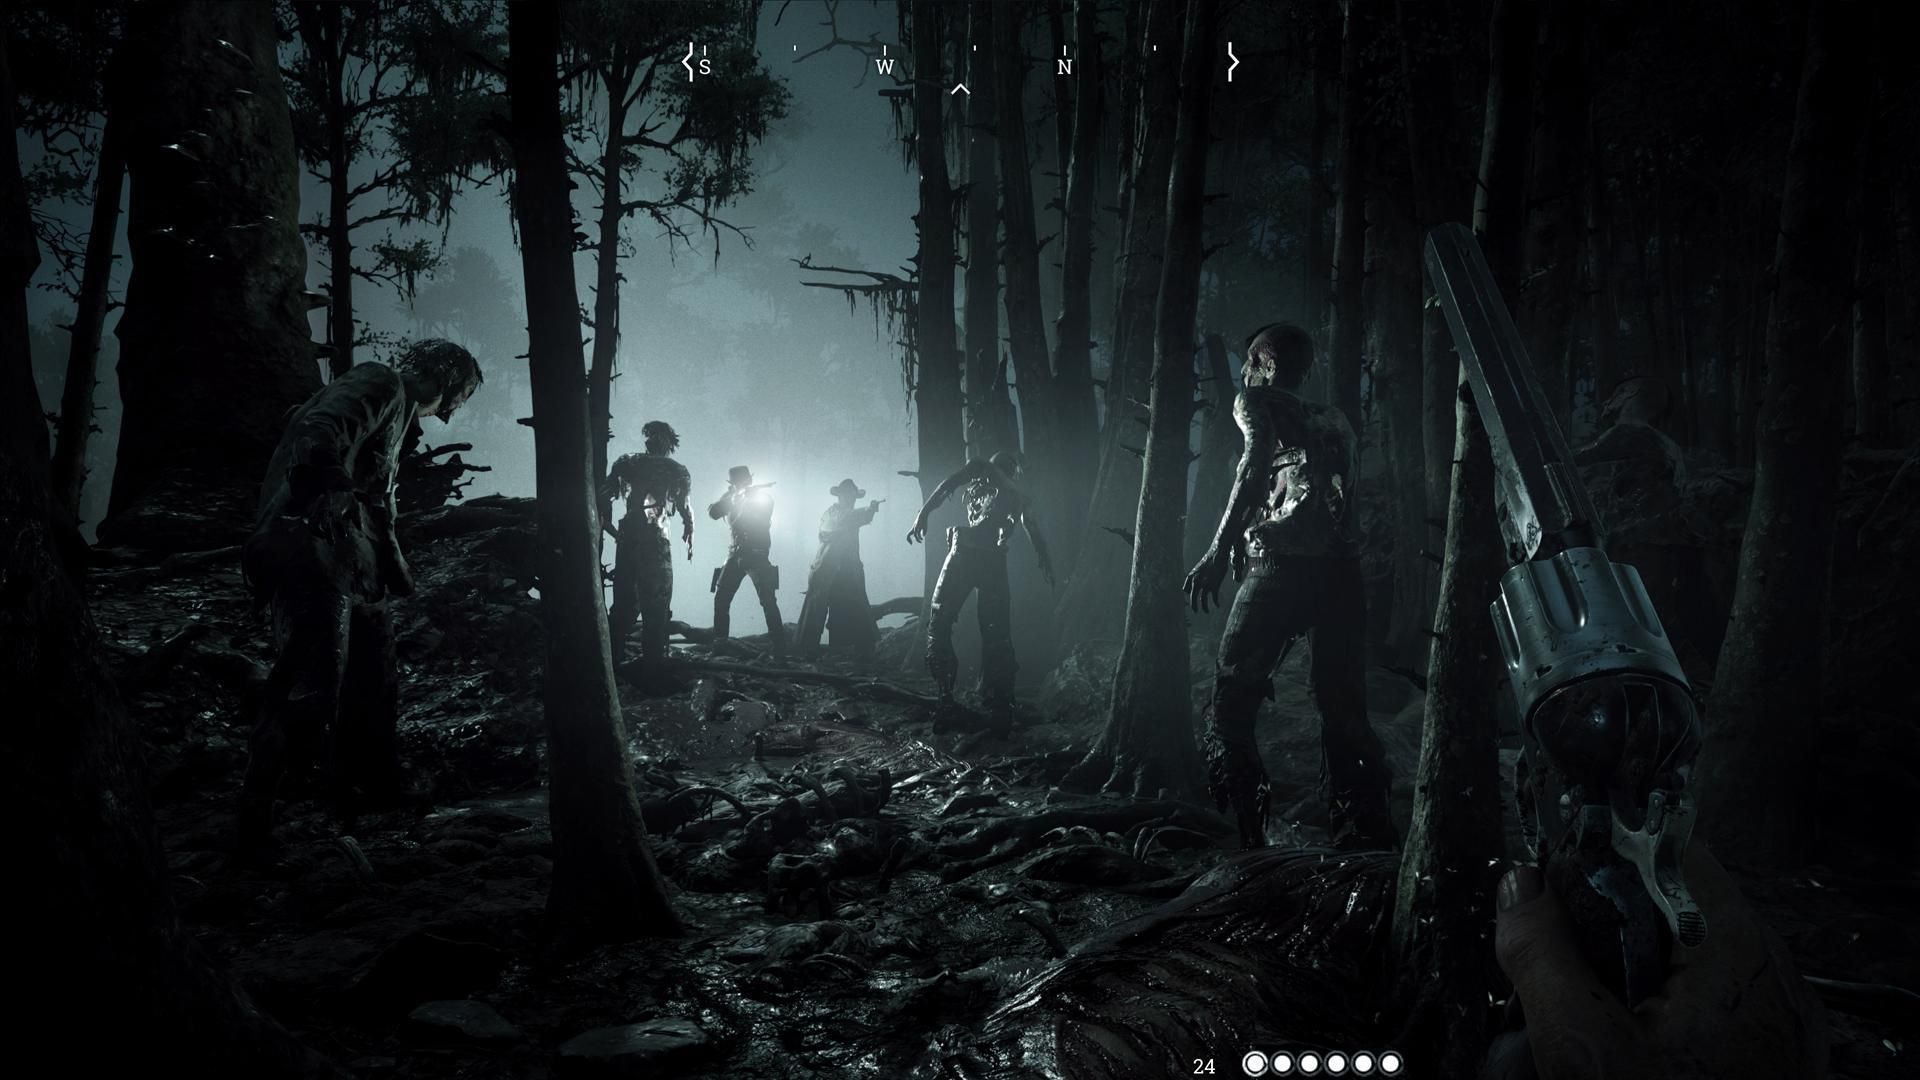 Hunt: Showdown as day and night missions